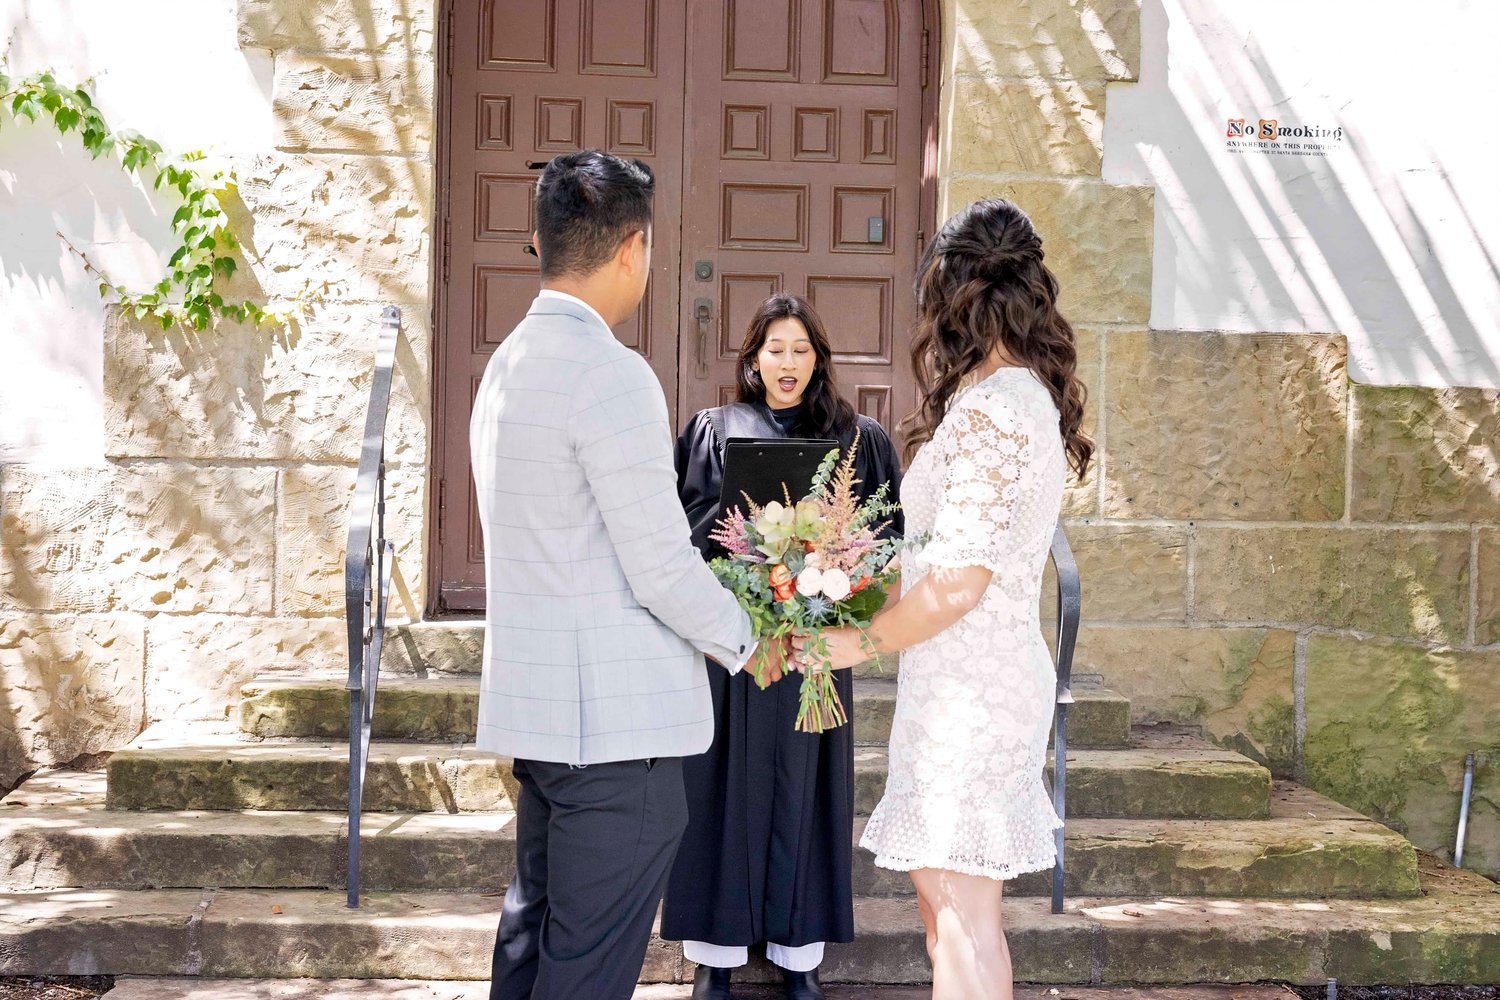 Justice of the peace performing an elopement ceremony at the Santa Barbara Courthouse